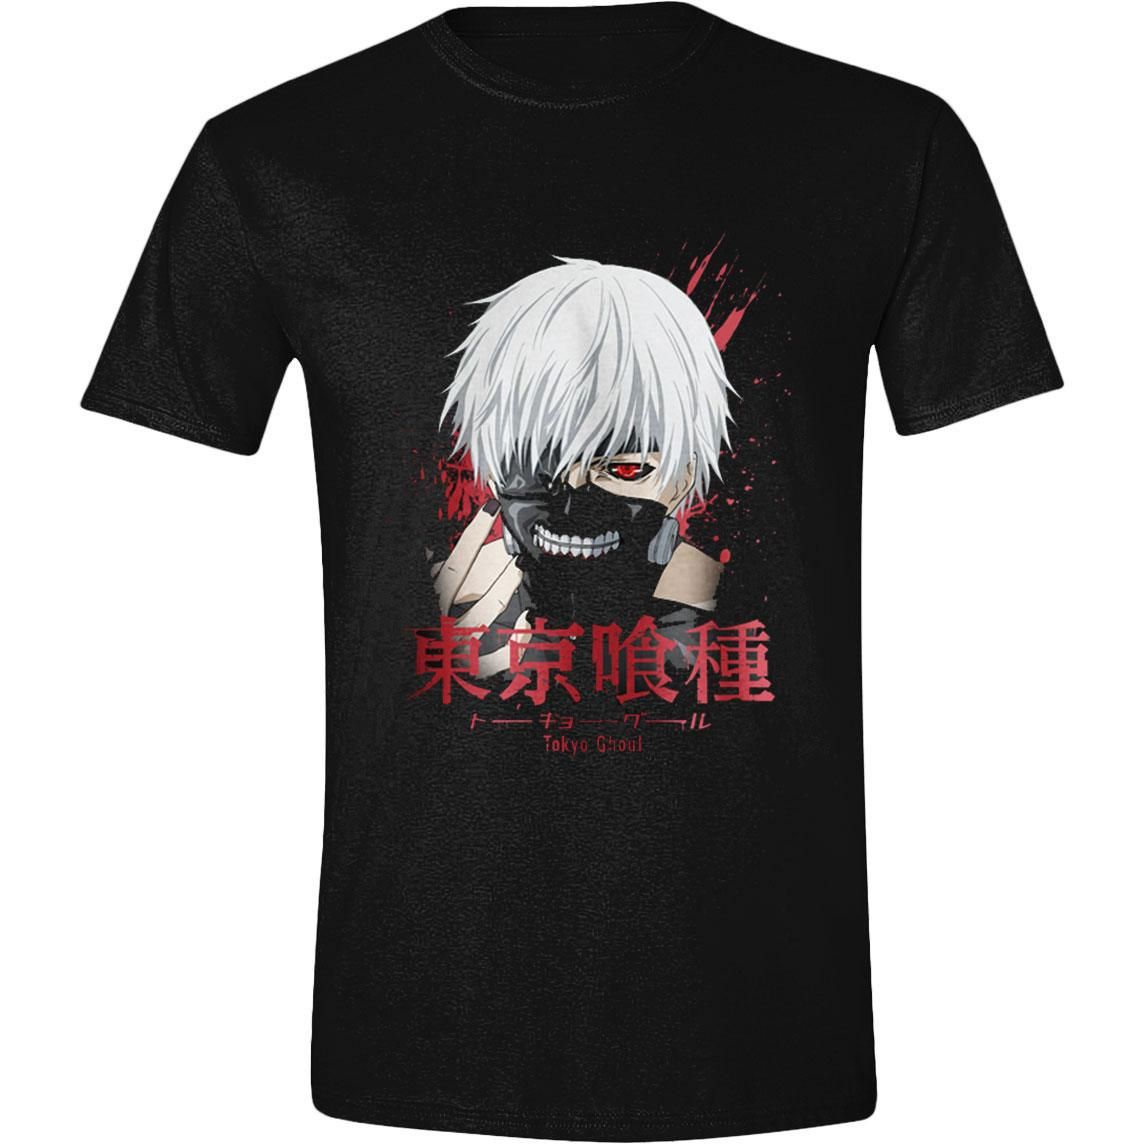 Tokyo Ghoul Tričko Within His Grasp Velikost XL PCMerch